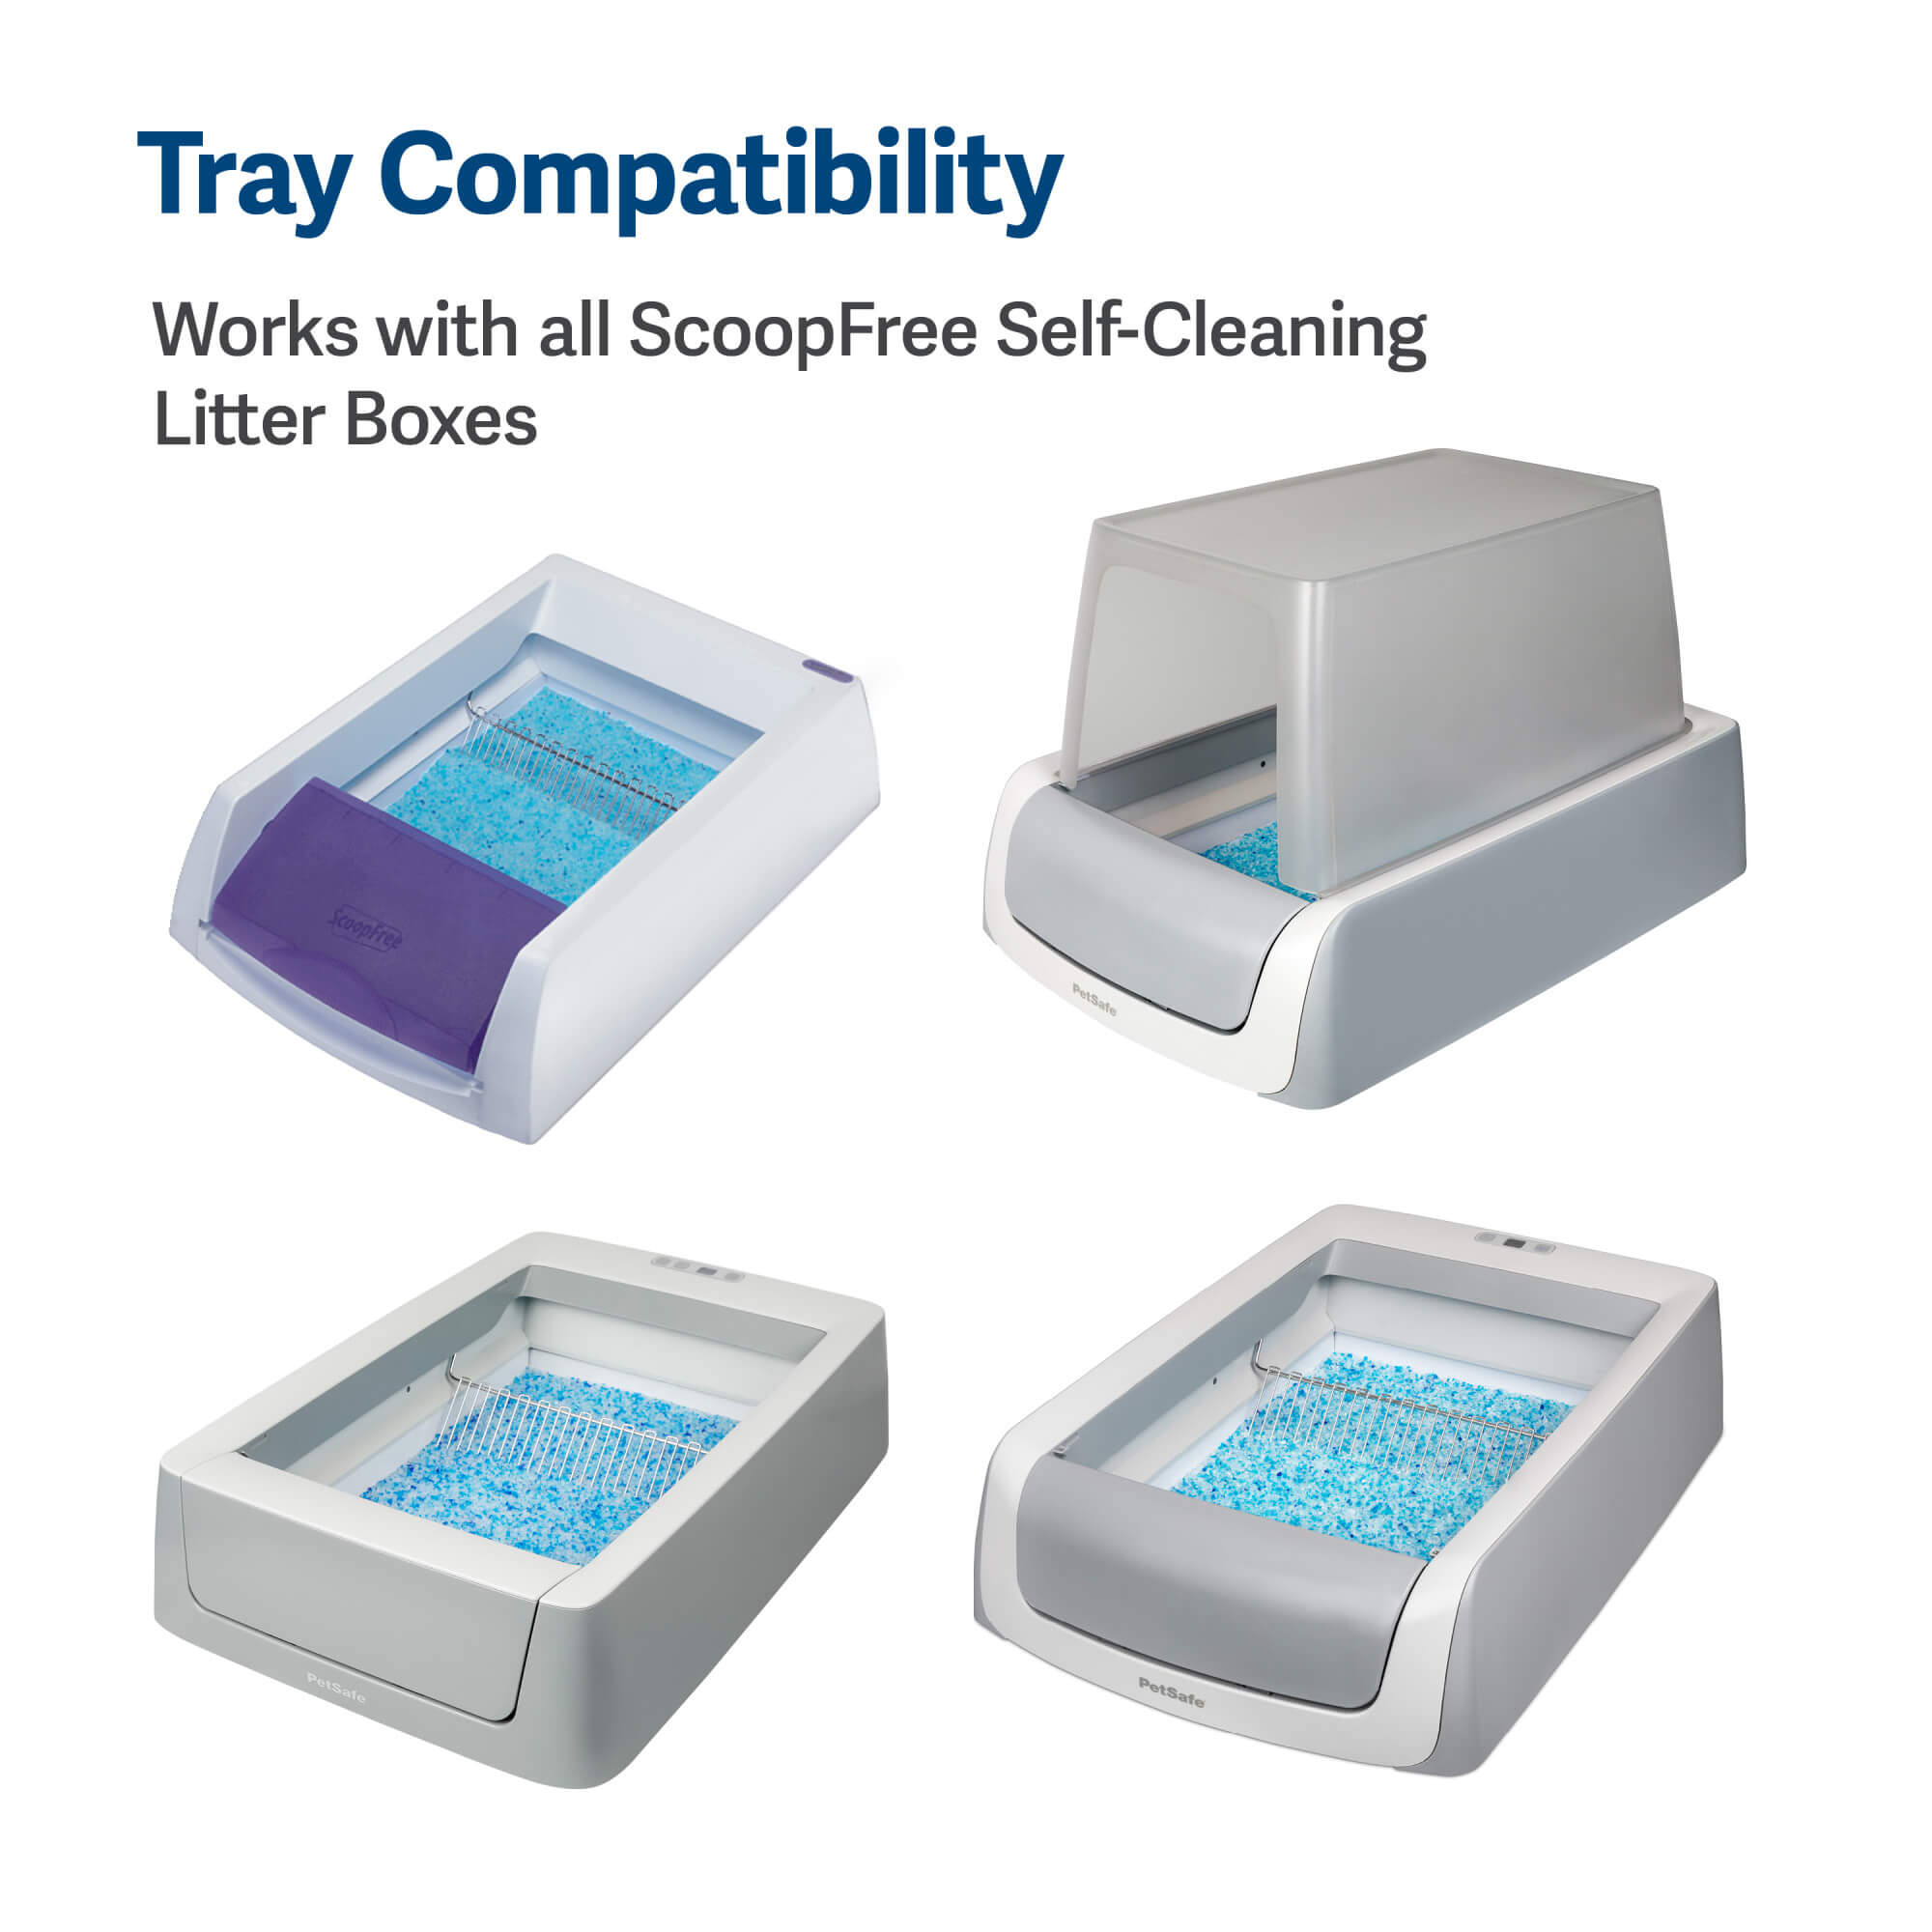 tray compatibility works with all scoopfree self-cleaning litter boxes